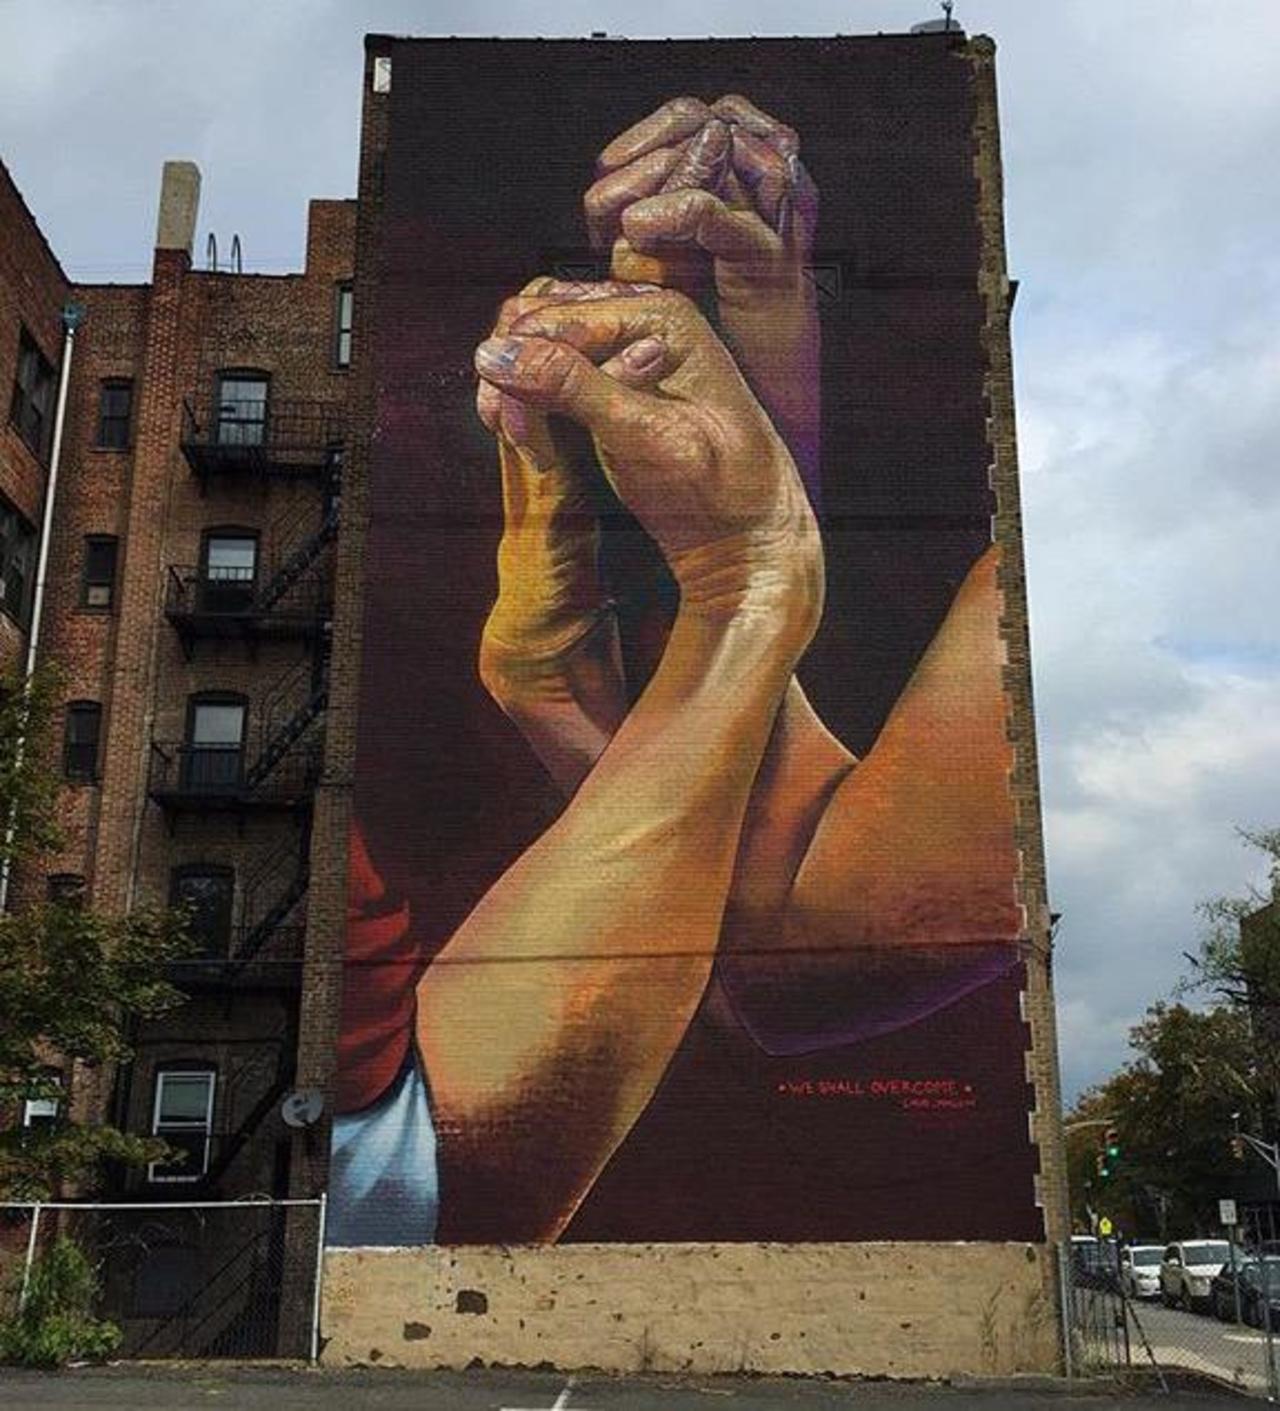 New Street Art by CaseMaclaim in Jersey City for the TheBKcollective 

#art #graffiti #mural #streetart http://t.co/m0p8LdzdBs